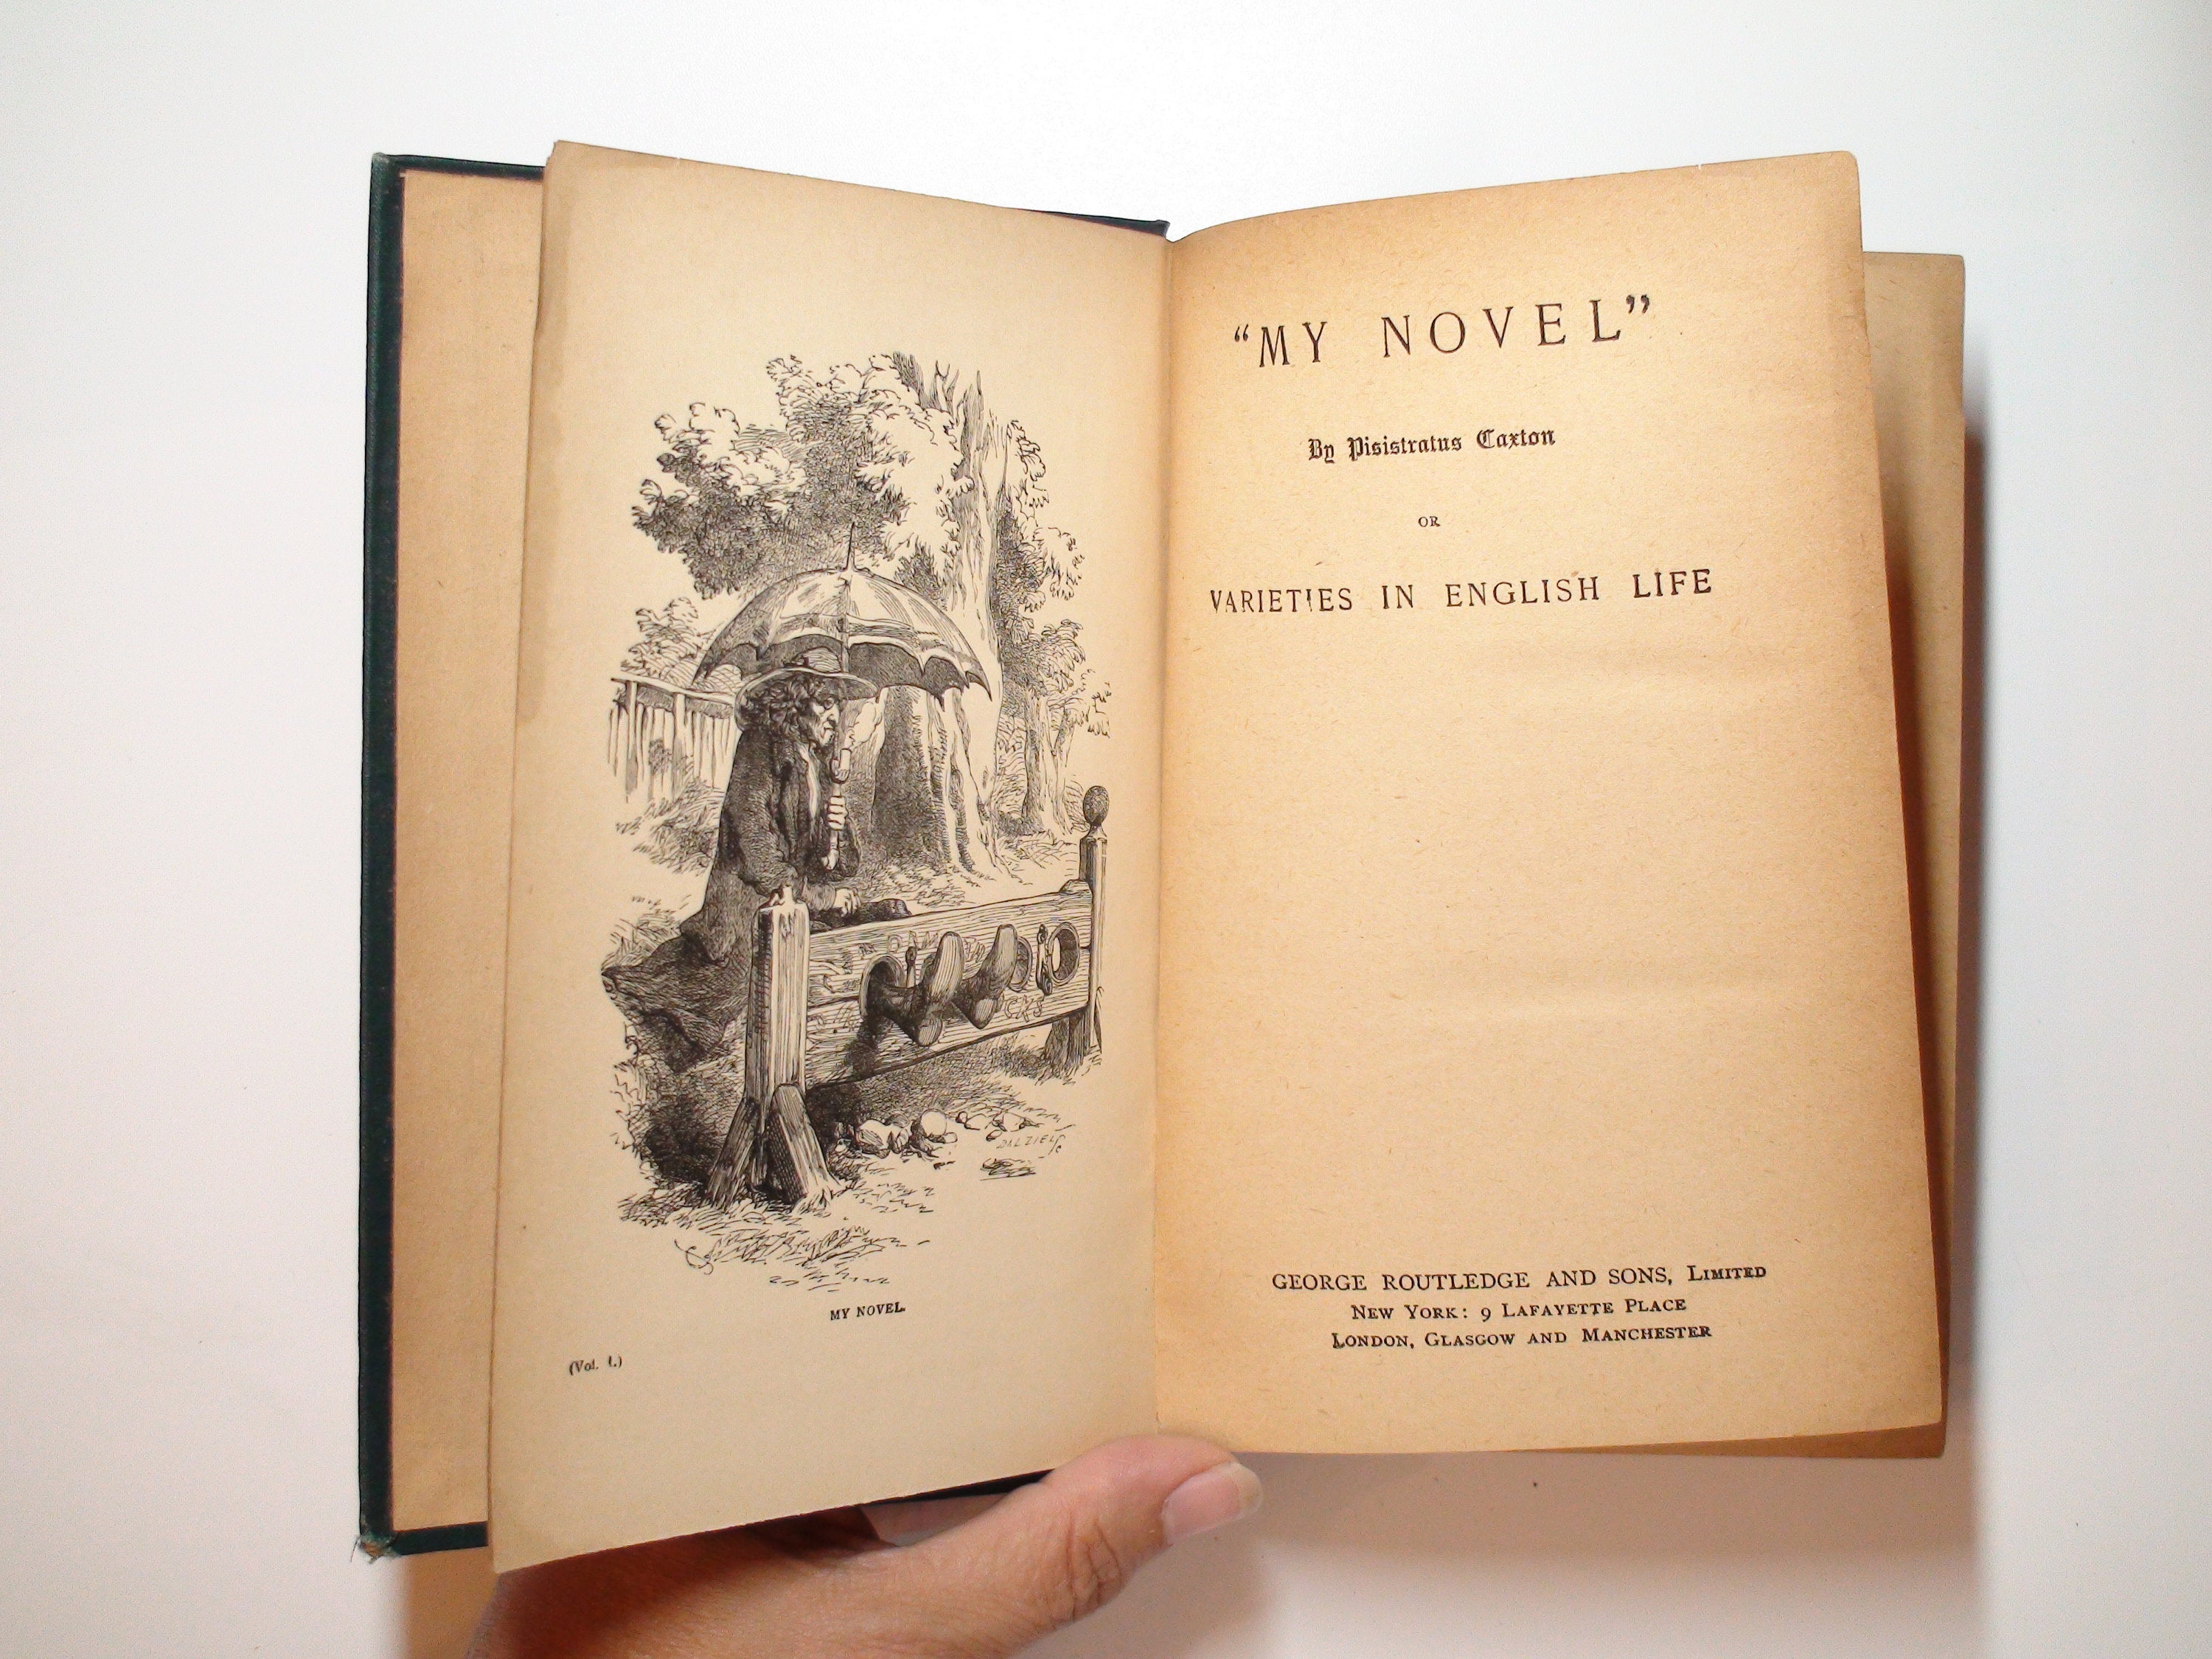 My Novel or Varieties in English Life, Henry Bulwer Lytton, Caxton Ed, 1890s